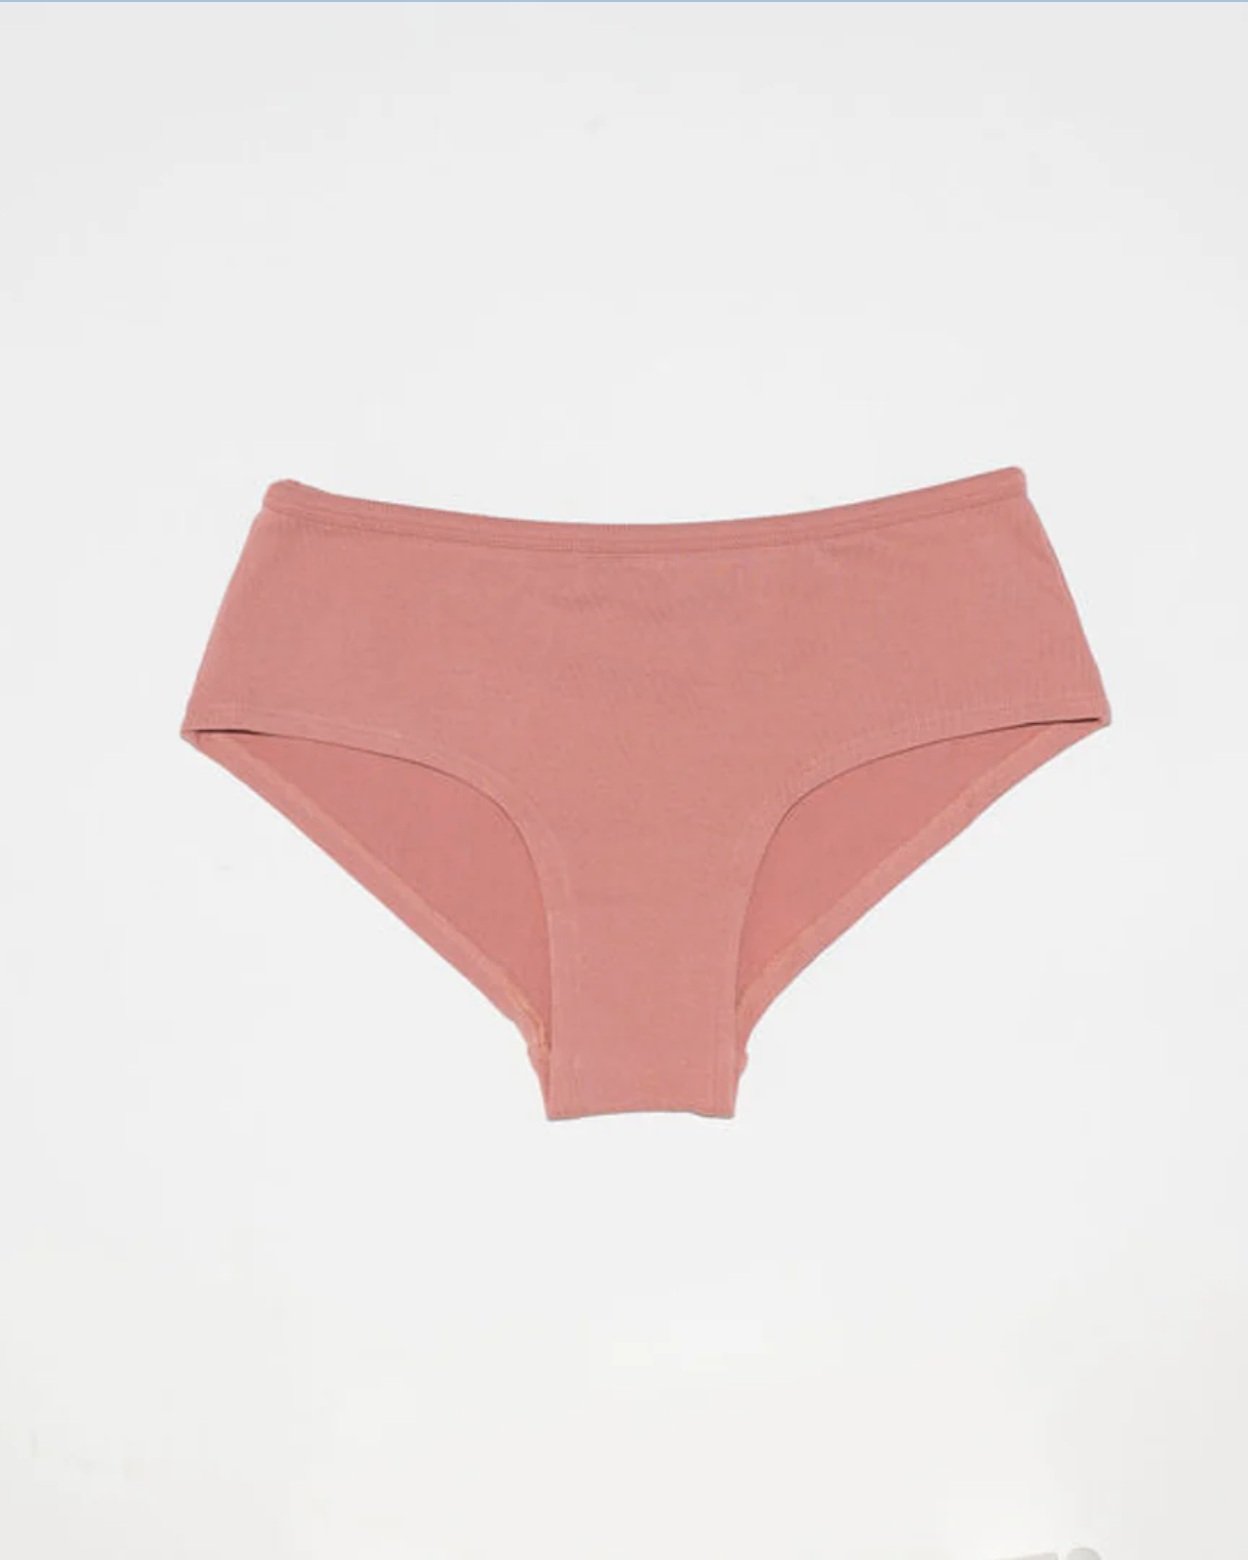 10 Sustainable Underwear Brands That Make You Feel Comfortable In